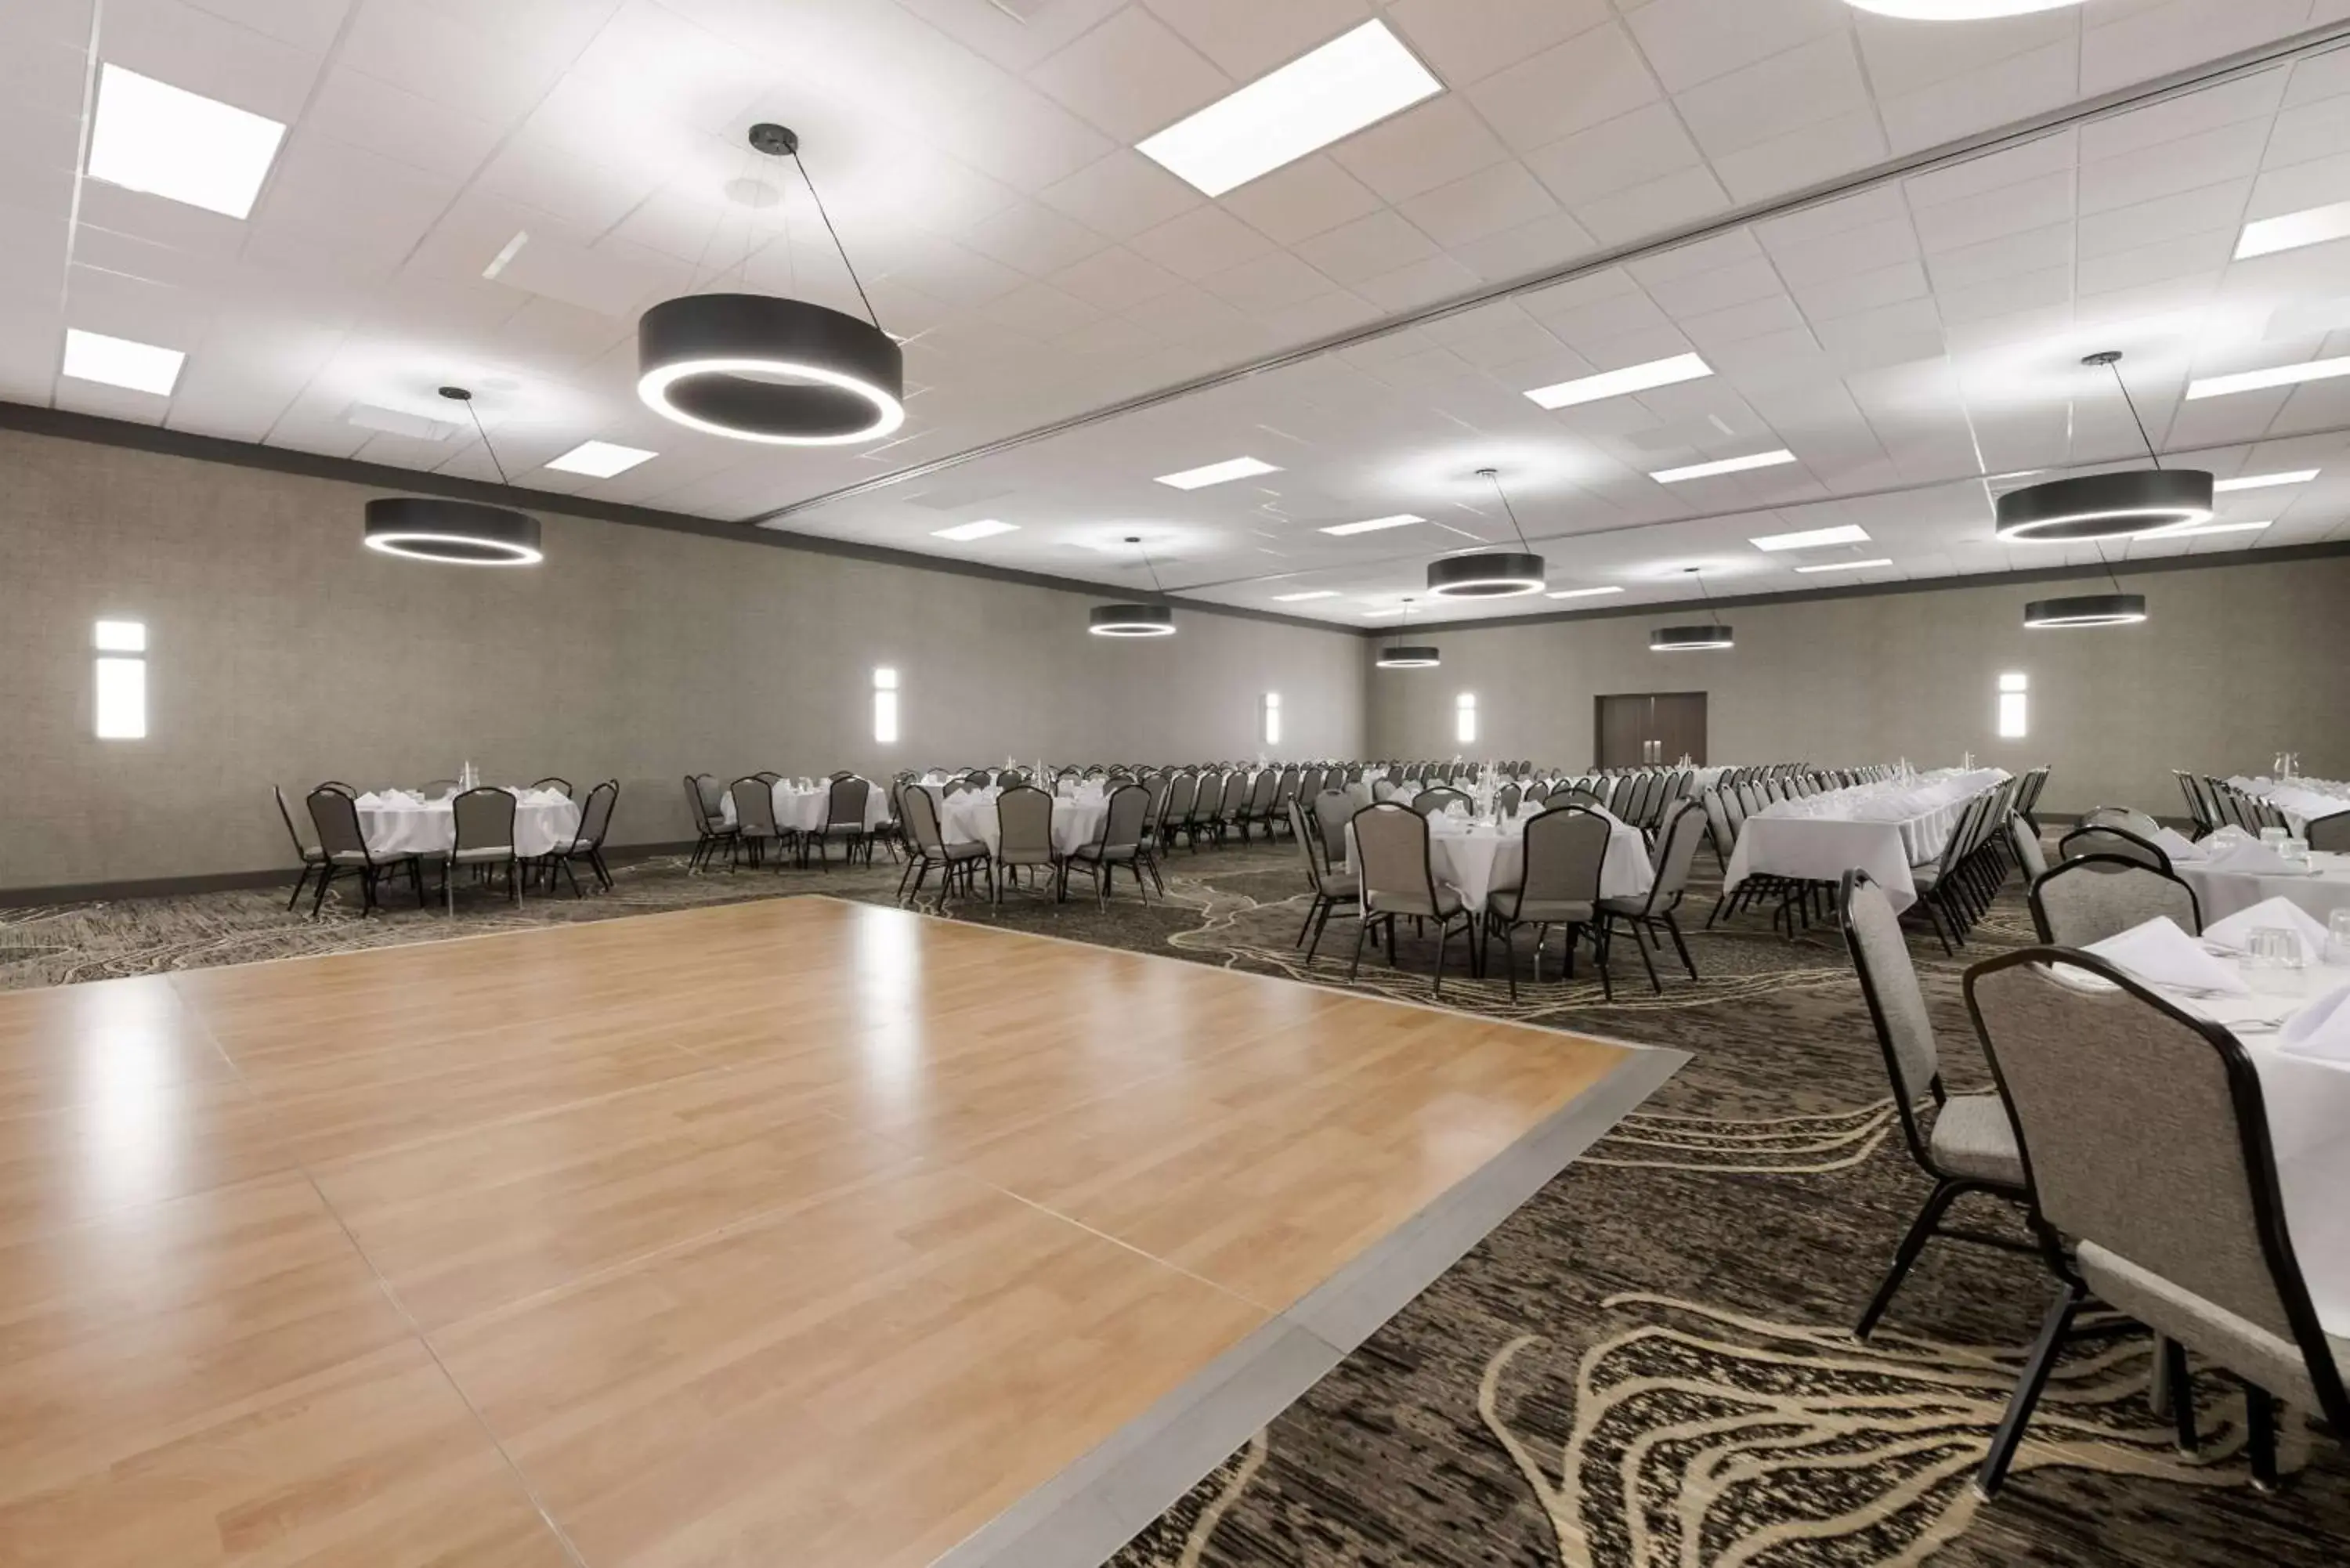 Banquet/Function facilities, Banquet Facilities in Best Western Holiday Lodge